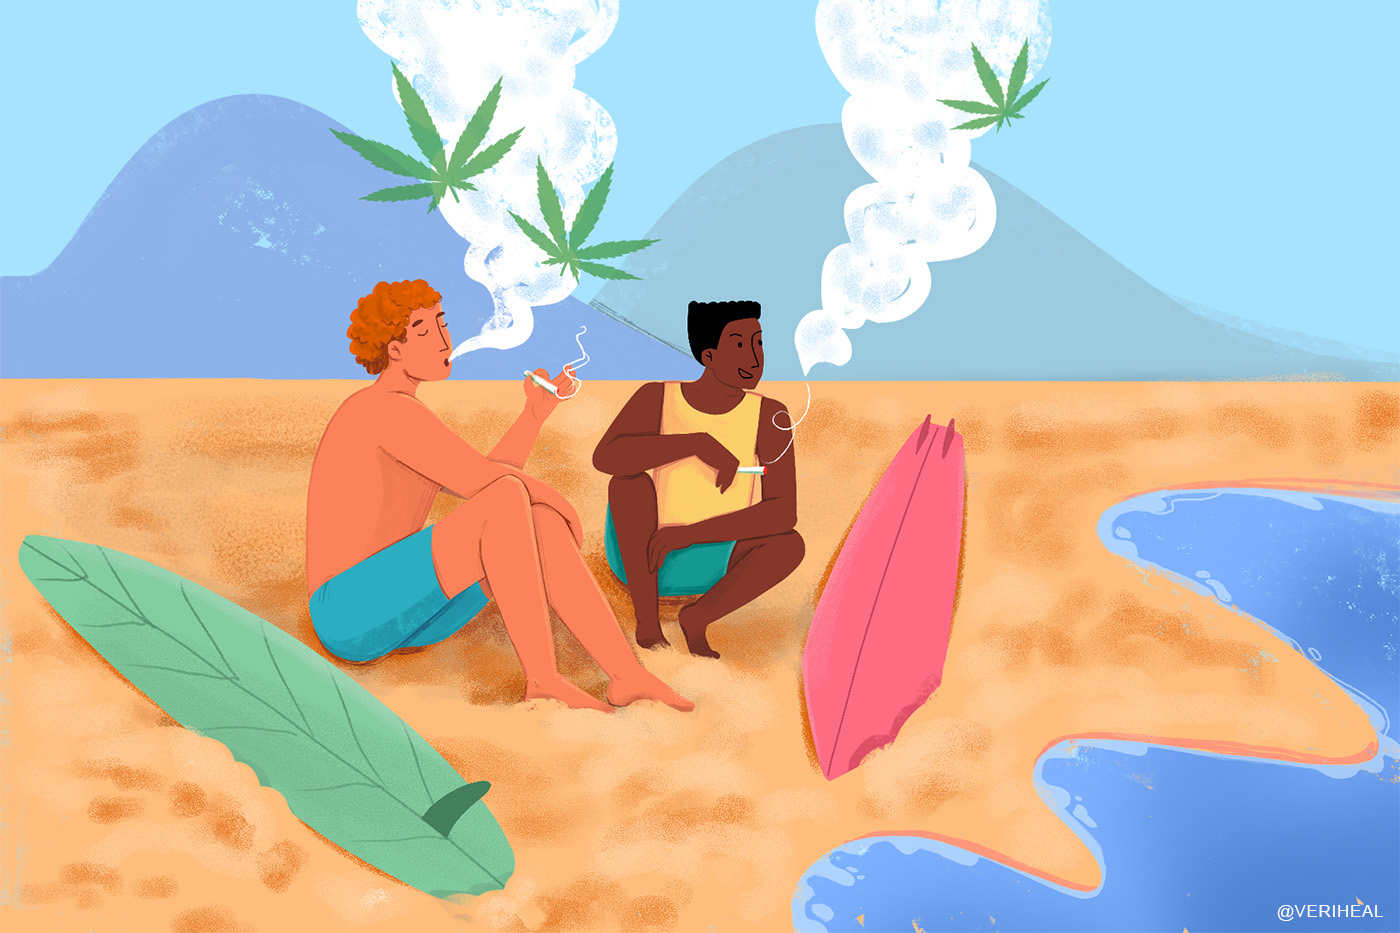 Dropping in on the Dope: Cannabis’ Place in Surfer Culture